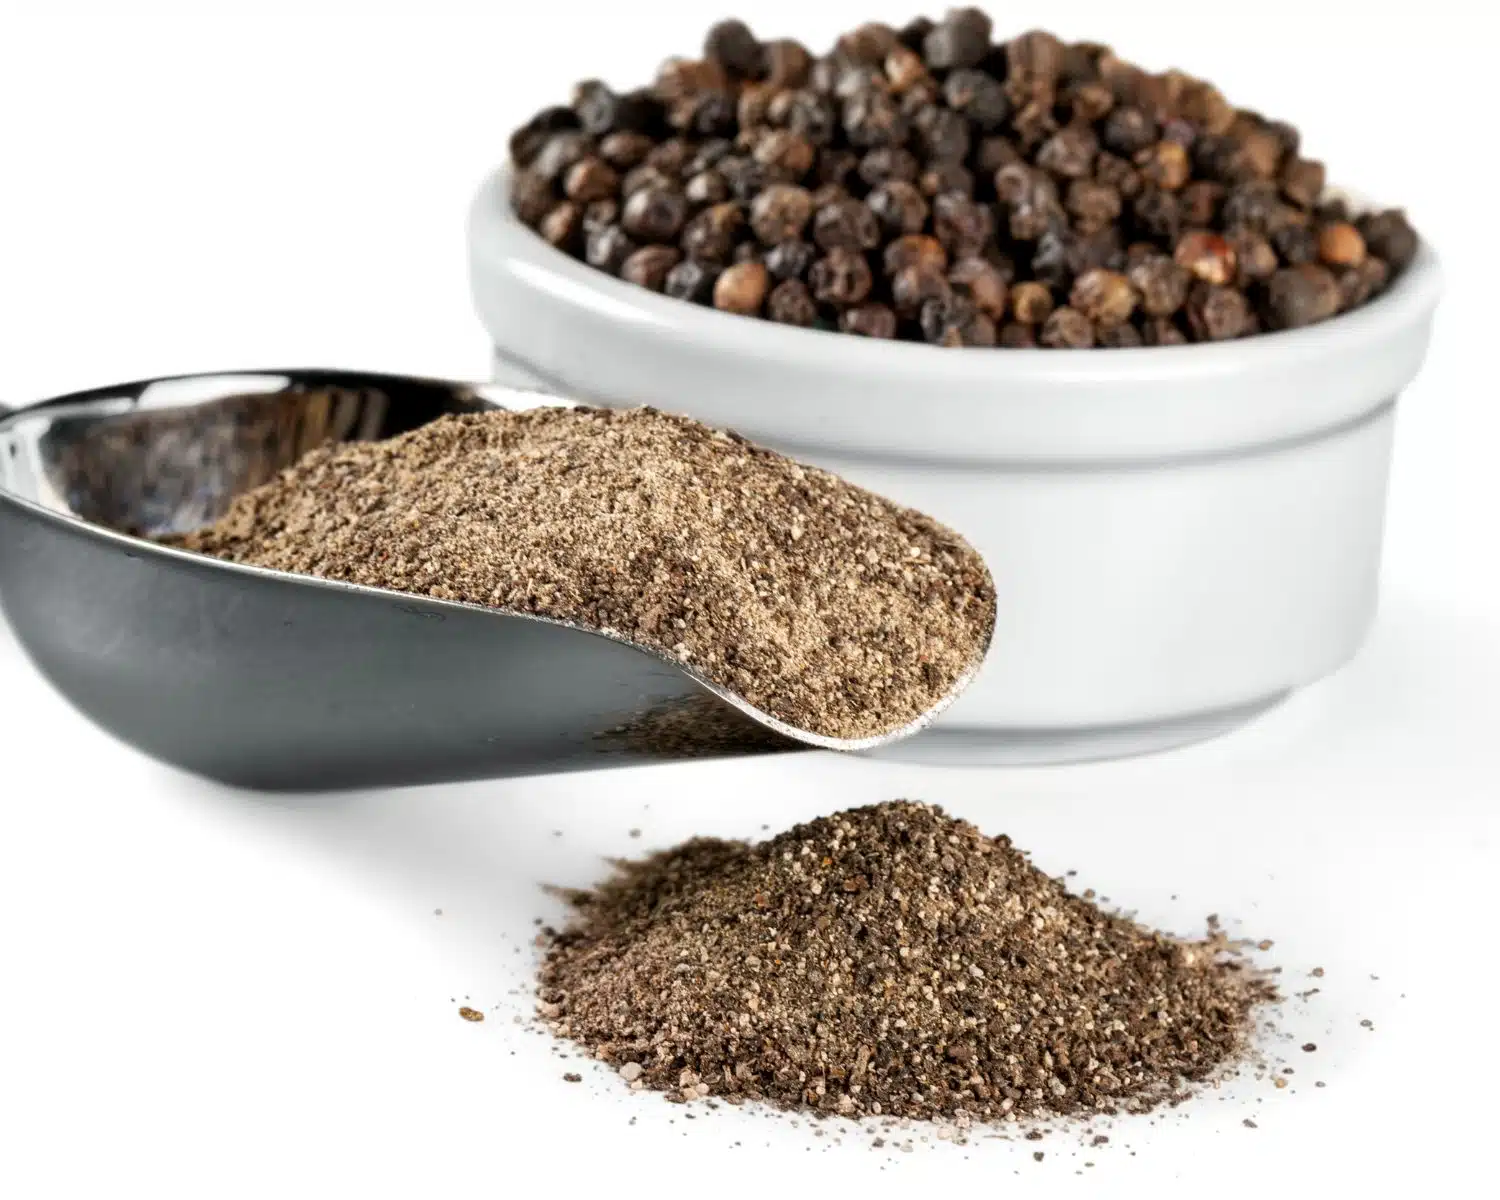 Peppercorns are in a bowl and a large scoop has freshly ground black pepper and some of it is scattered in front of the scoop.